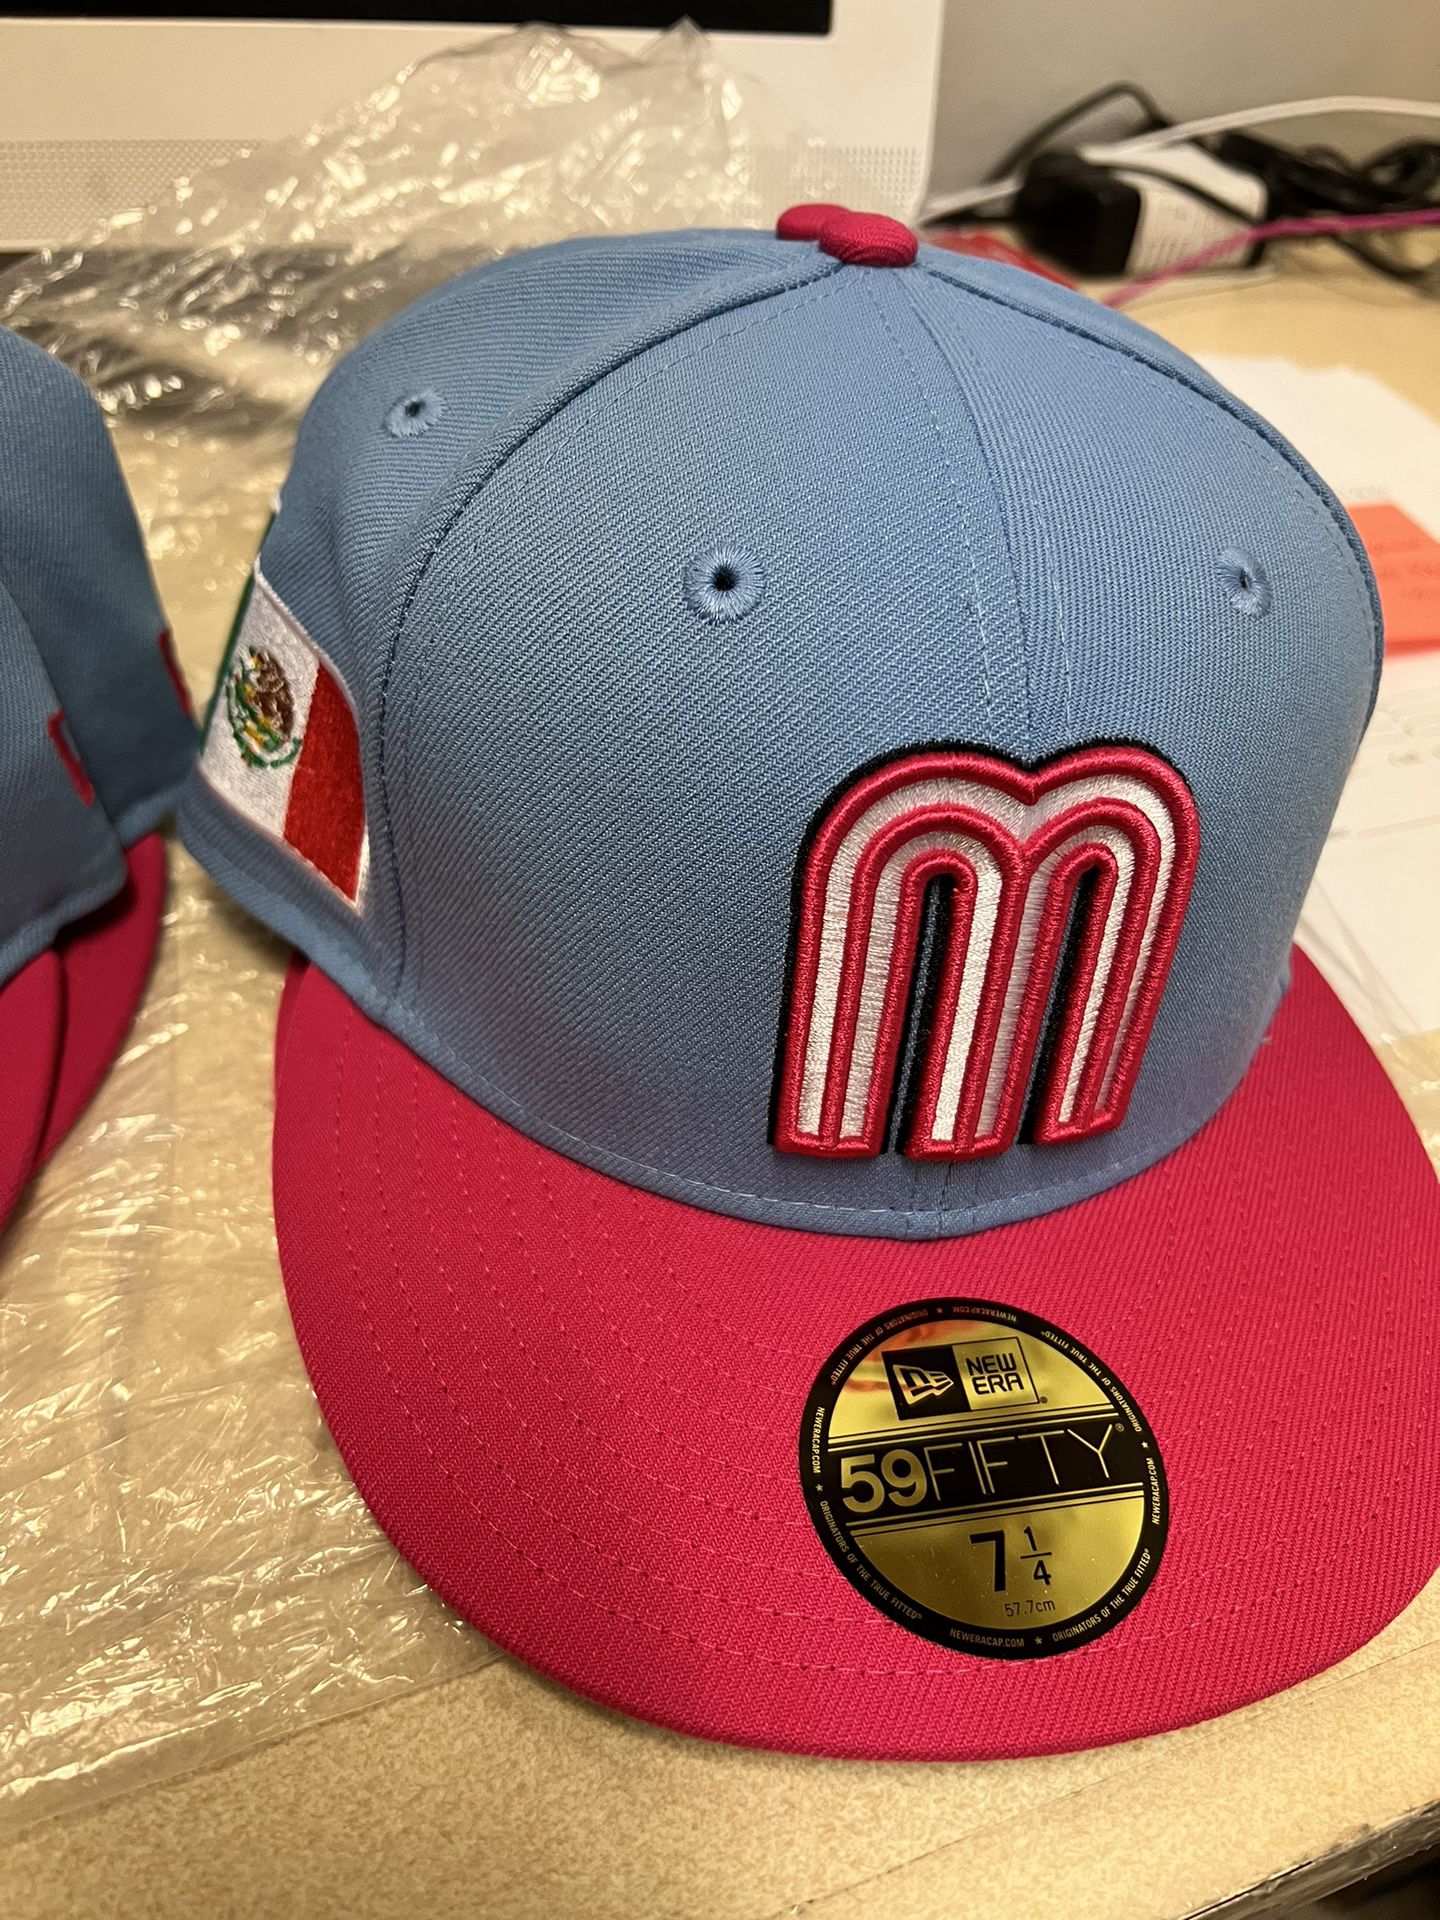 Mexican Baseball Team Limited Hat for Sale in Las Vegas, NV - OfferUp